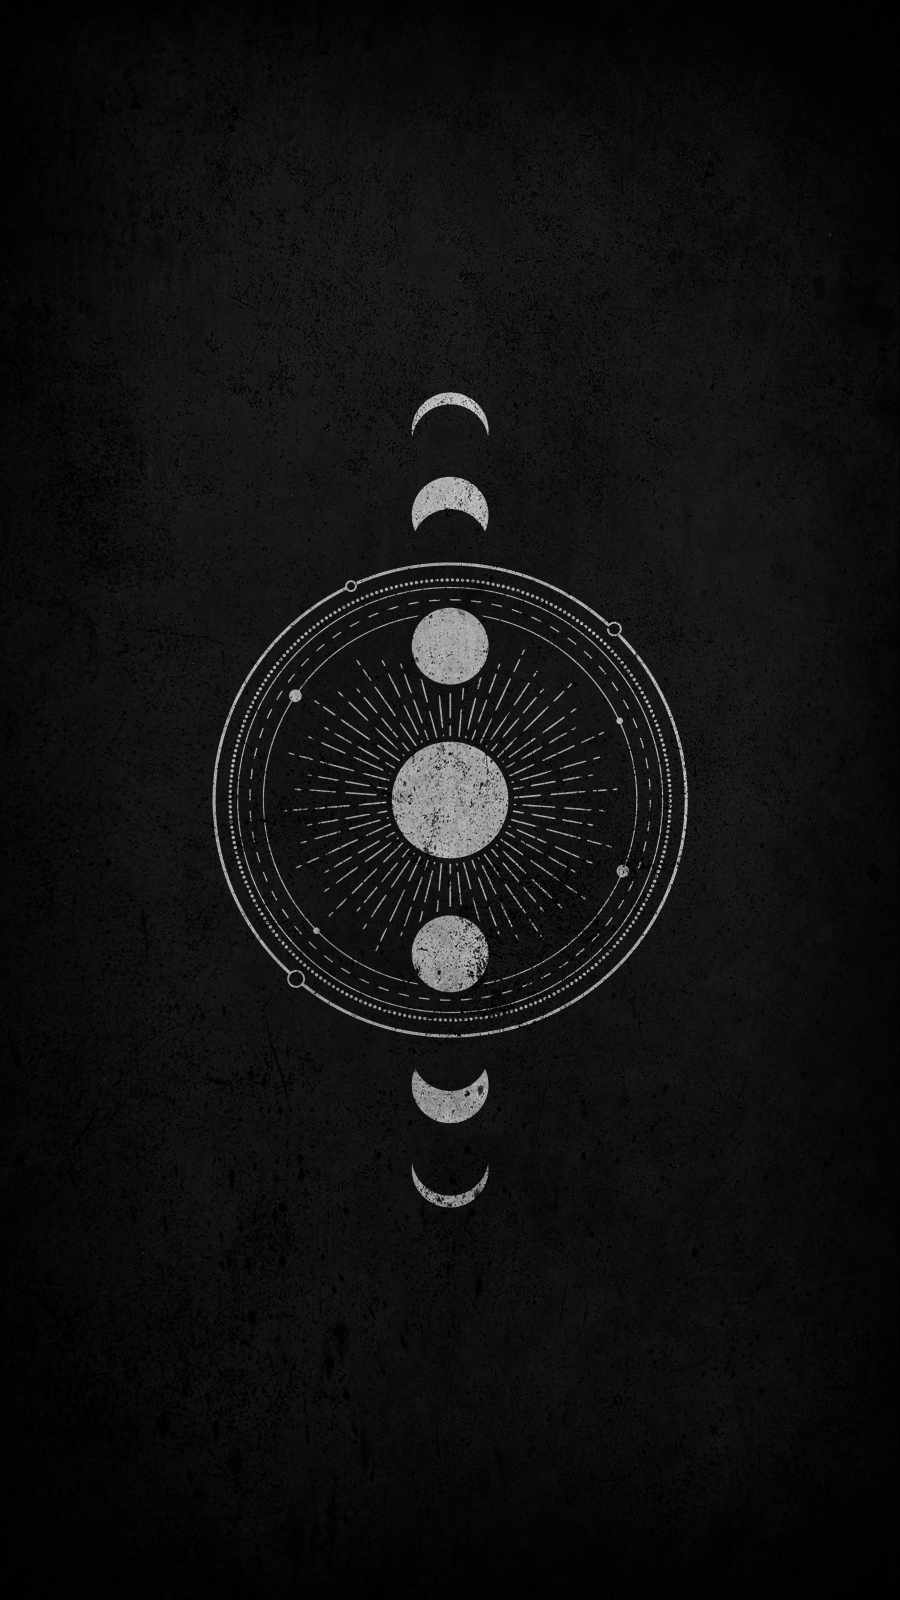 The moon phases on a black background - Moon phases